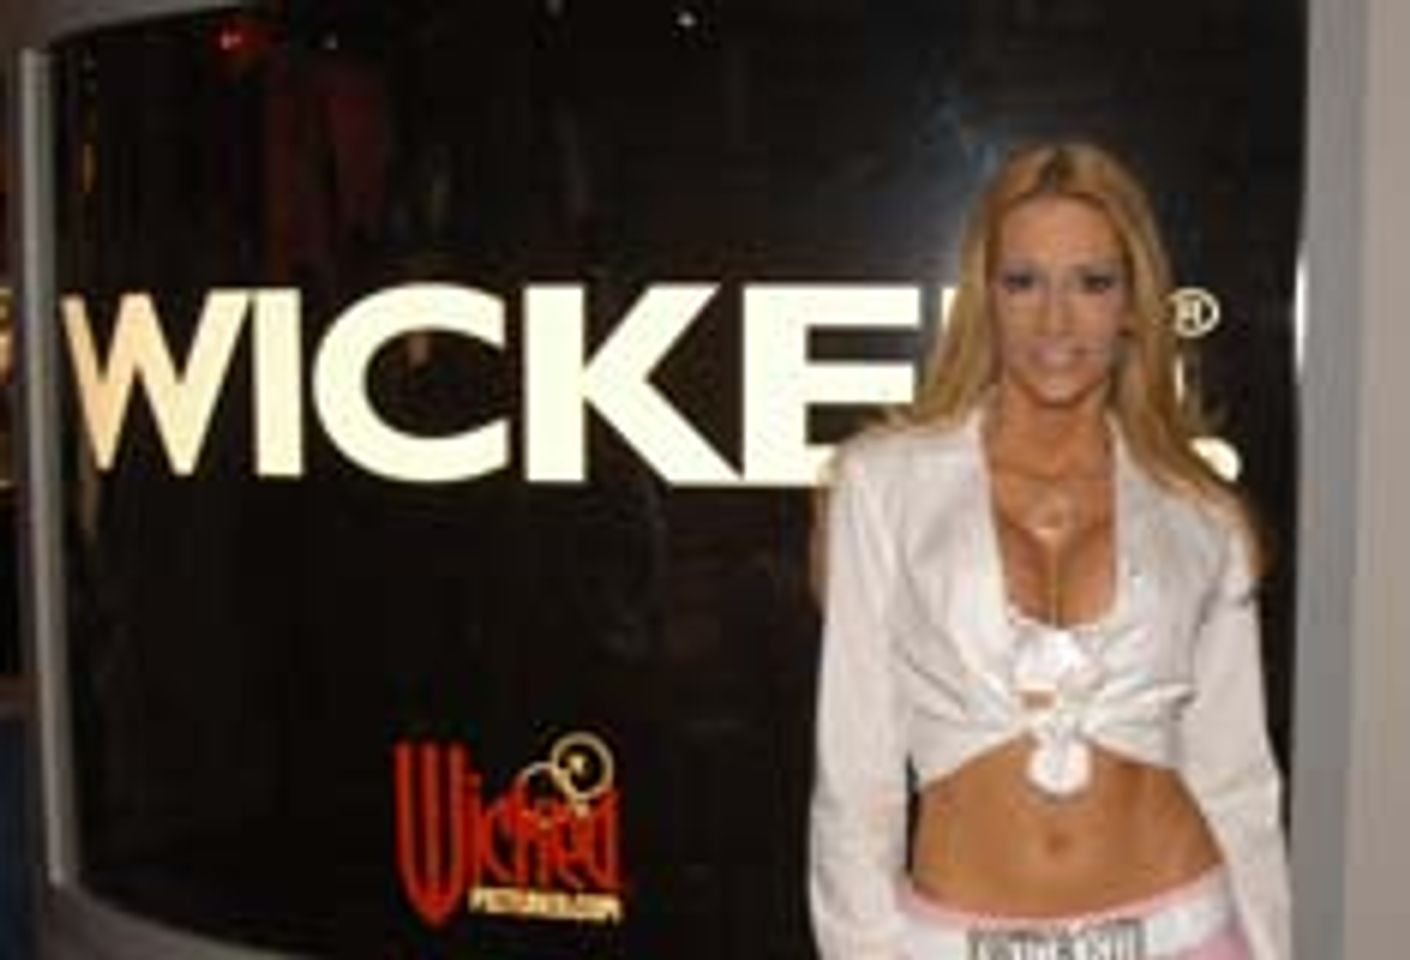 Wicked Pictures Has Success Trading Card Debut At AEE